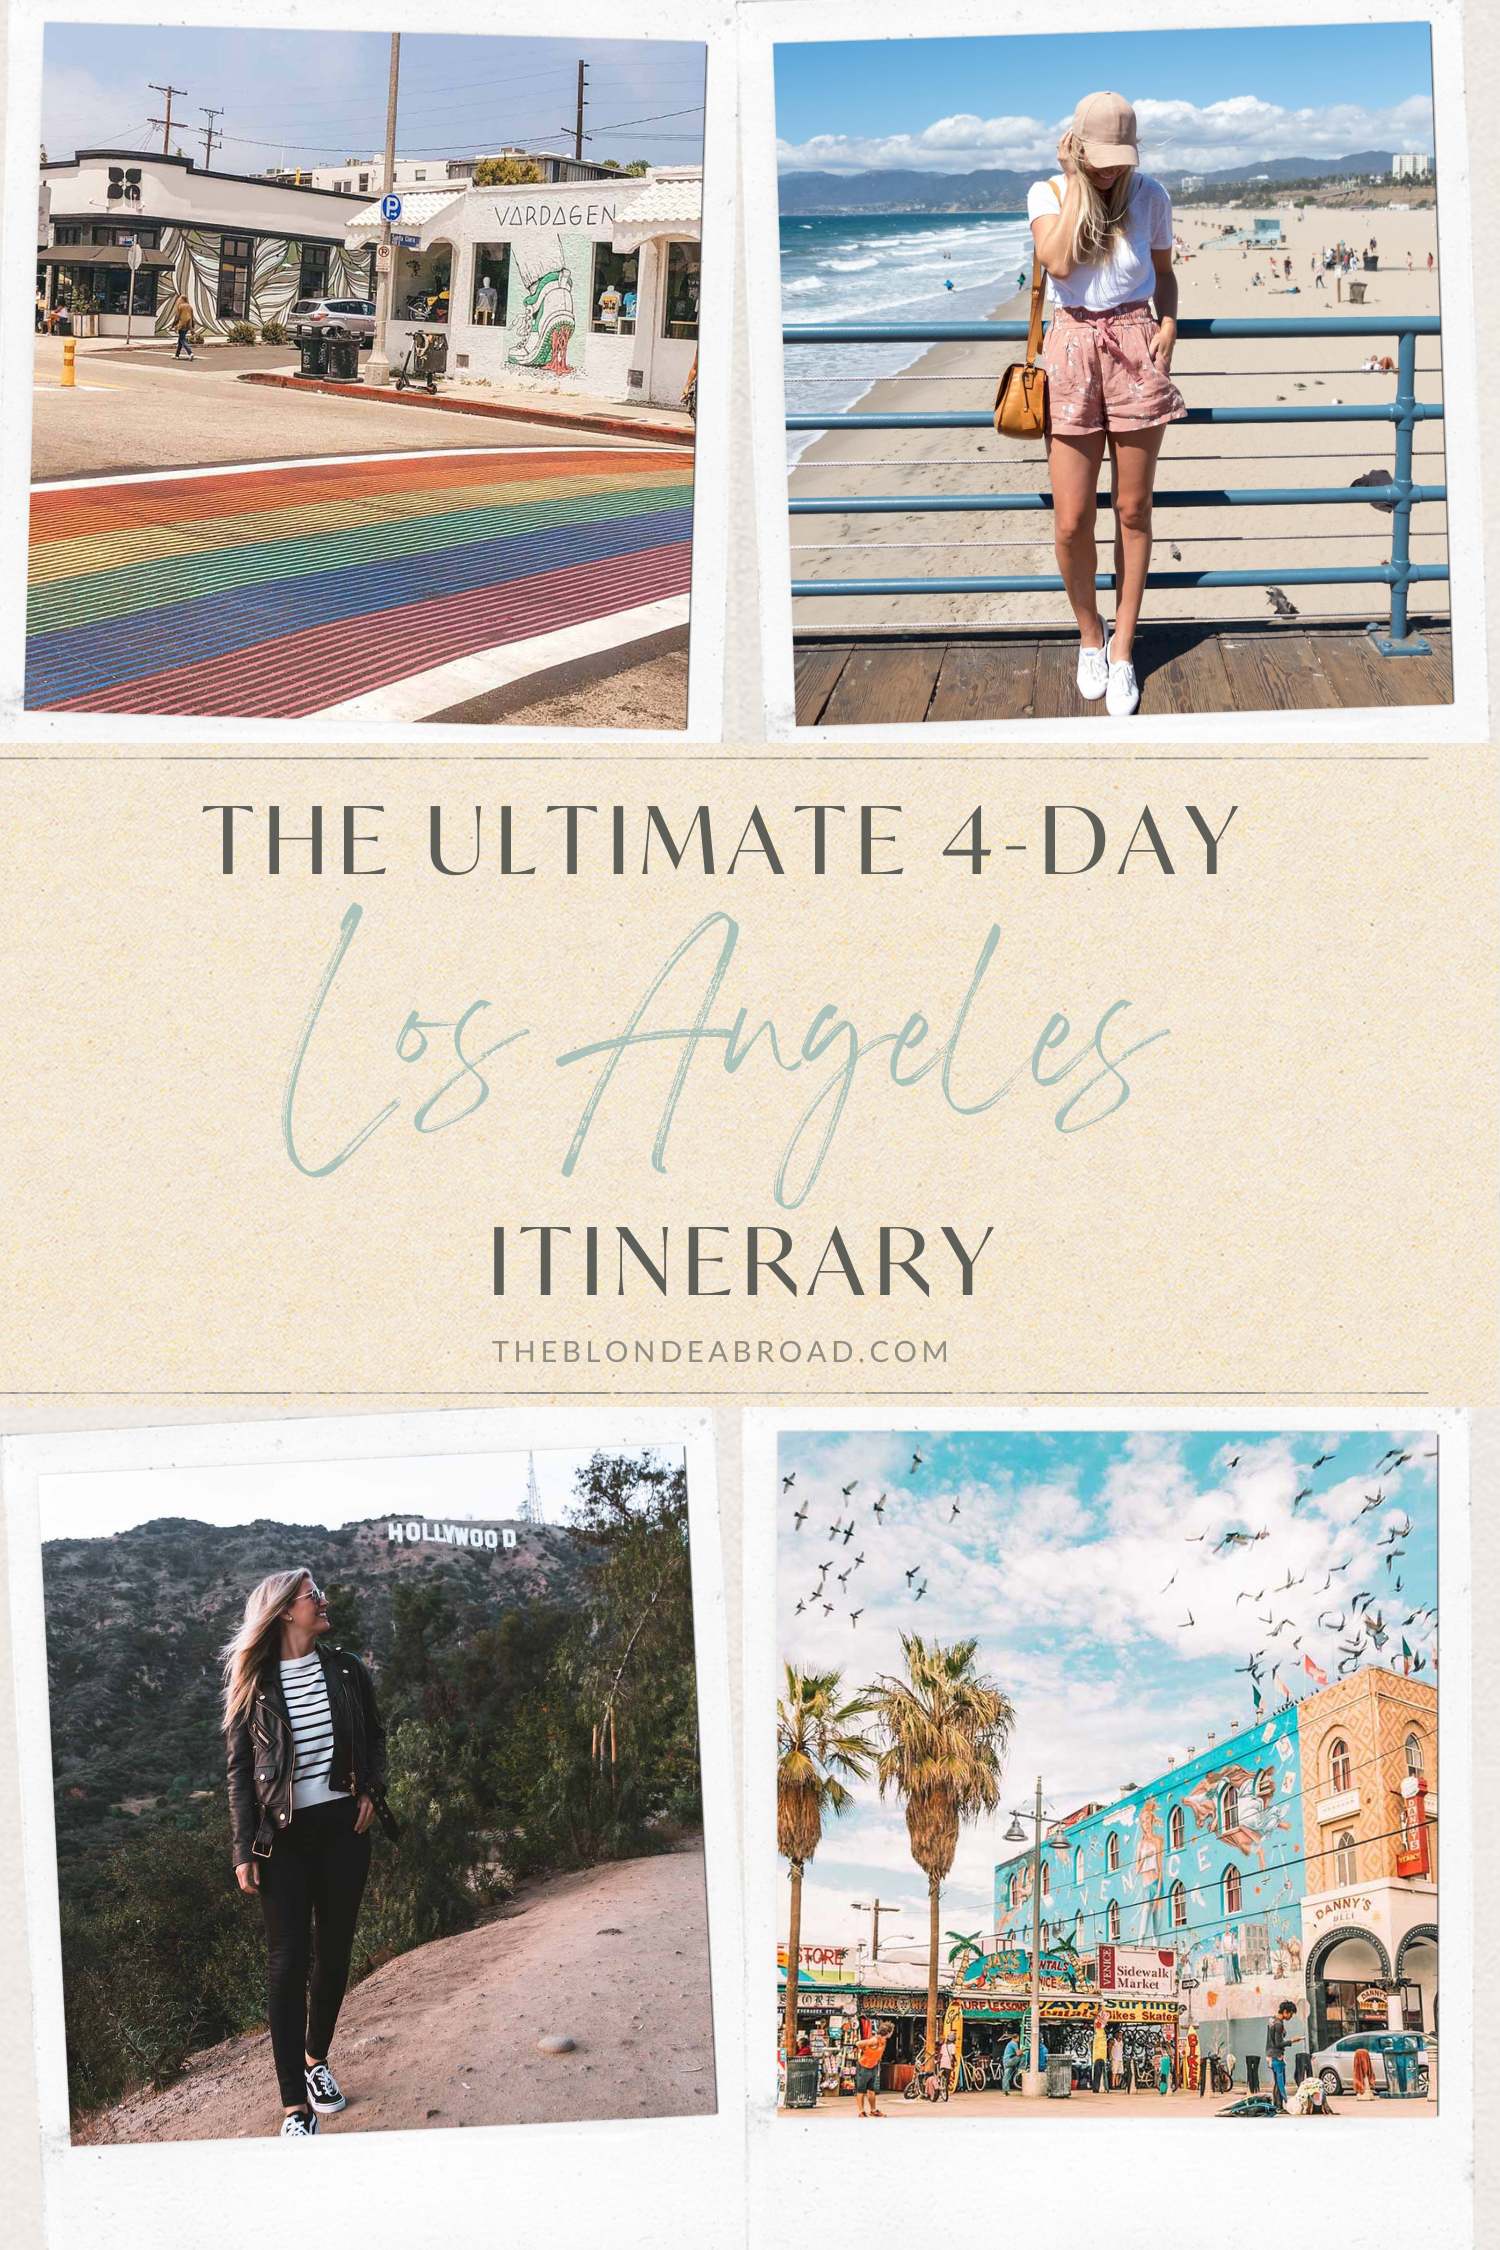 The Ultimate 4 Day Los Angeles Itinerary